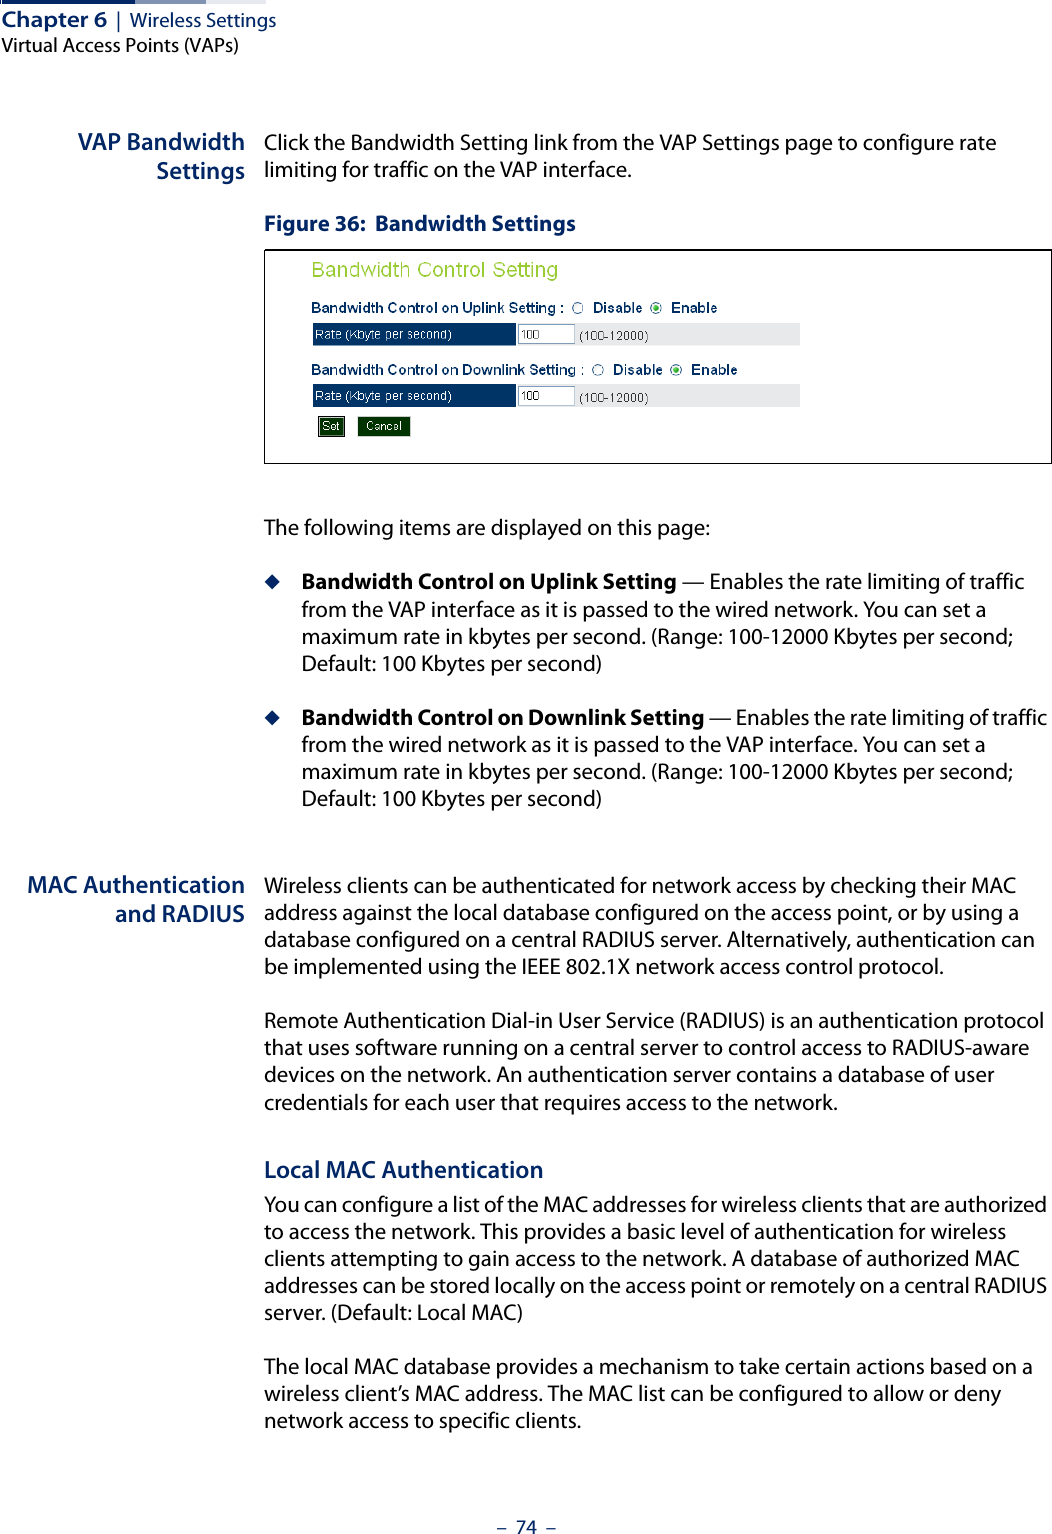 Chapter 6  |  Wireless SettingsVirtual Access Points (VAPs)–  74  –VAP BandwidthSettingsClick the Bandwidth Setting link from the VAP Settings page to configure rate limiting for traffic on the VAP interface.Figure 36:  Bandwidth SettingsThe following items are displayed on this page:◆Bandwidth Control on Uplink Setting — Enables the rate limiting of traffic from the VAP interface as it is passed to the wired network. You can set a maximum rate in kbytes per second. (Range: 100-12000 Kbytes per second; Default: 100 Kbytes per second)◆Bandwidth Control on Downlink Setting — Enables the rate limiting of traffic from the wired network as it is passed to the VAP interface. You can set a maximum rate in kbytes per second. (Range: 100-12000 Kbytes per second; Default: 100 Kbytes per second)MAC Authenticationand RADIUSWireless clients can be authenticated for network access by checking their MAC address against the local database configured on the access point, or by using a database configured on a central RADIUS server. Alternatively, authentication can be implemented using the IEEE 802.1X network access control protocol.Remote Authentication Dial-in User Service (RADIUS) is an authentication protocol that uses software running on a central server to control access to RADIUS-aware devices on the network. An authentication server contains a database of user credentials for each user that requires access to the network.Local MAC AuthenticationYou can configure a list of the MAC addresses for wireless clients that are authorized to access the network. This provides a basic level of authentication for wireless clients attempting to gain access to the network. A database of authorized MAC addresses can be stored locally on the access point or remotely on a central RADIUS server. (Default: Local MAC)The local MAC database provides a mechanism to take certain actions based on a wireless client’s MAC address. The MAC list can be configured to allow or deny network access to specific clients.